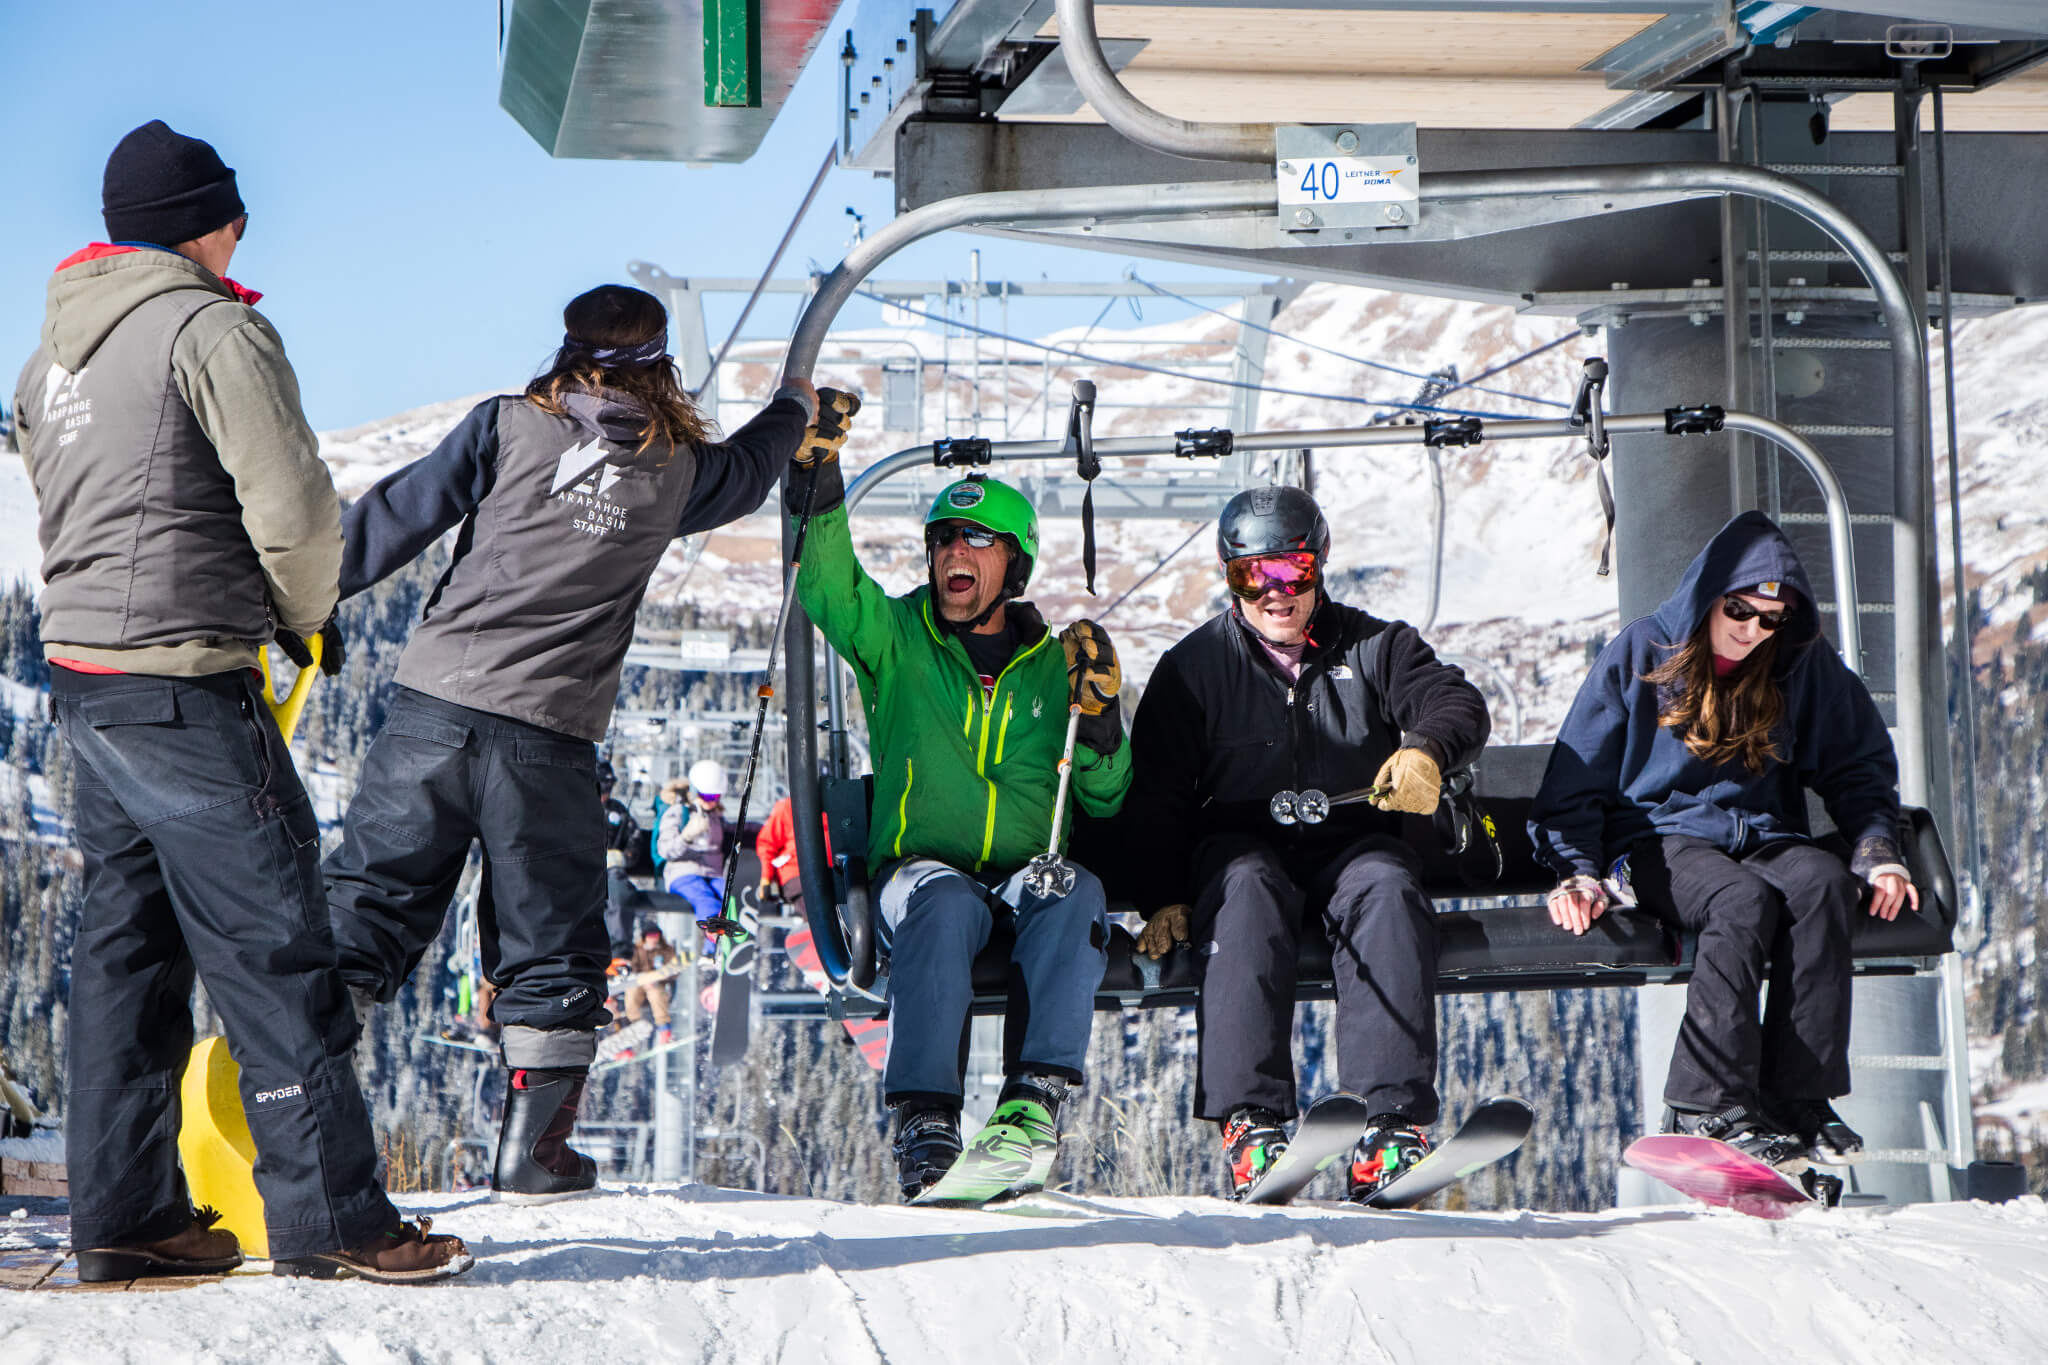 Opening Day in Colorado: Arapahoe Basin wins the Race to Open